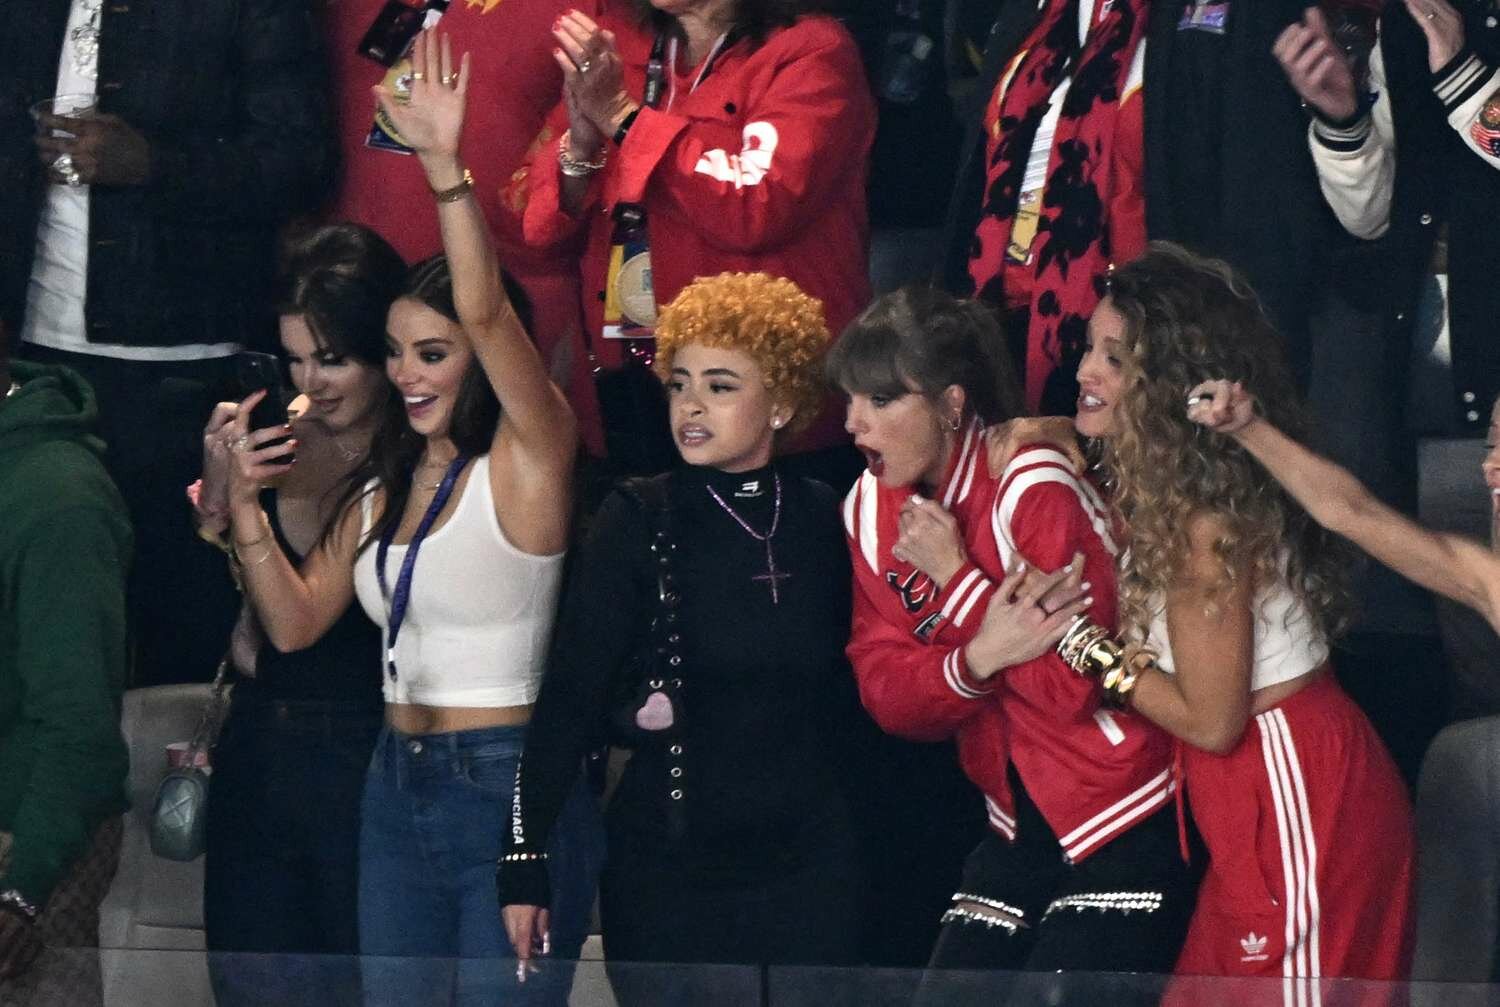 Taylor Swift, US actress Blake Lively, US rapper Ice Spice and US singer-songwriter Lana Del Rey (L) react during Super Bowl LVIII 